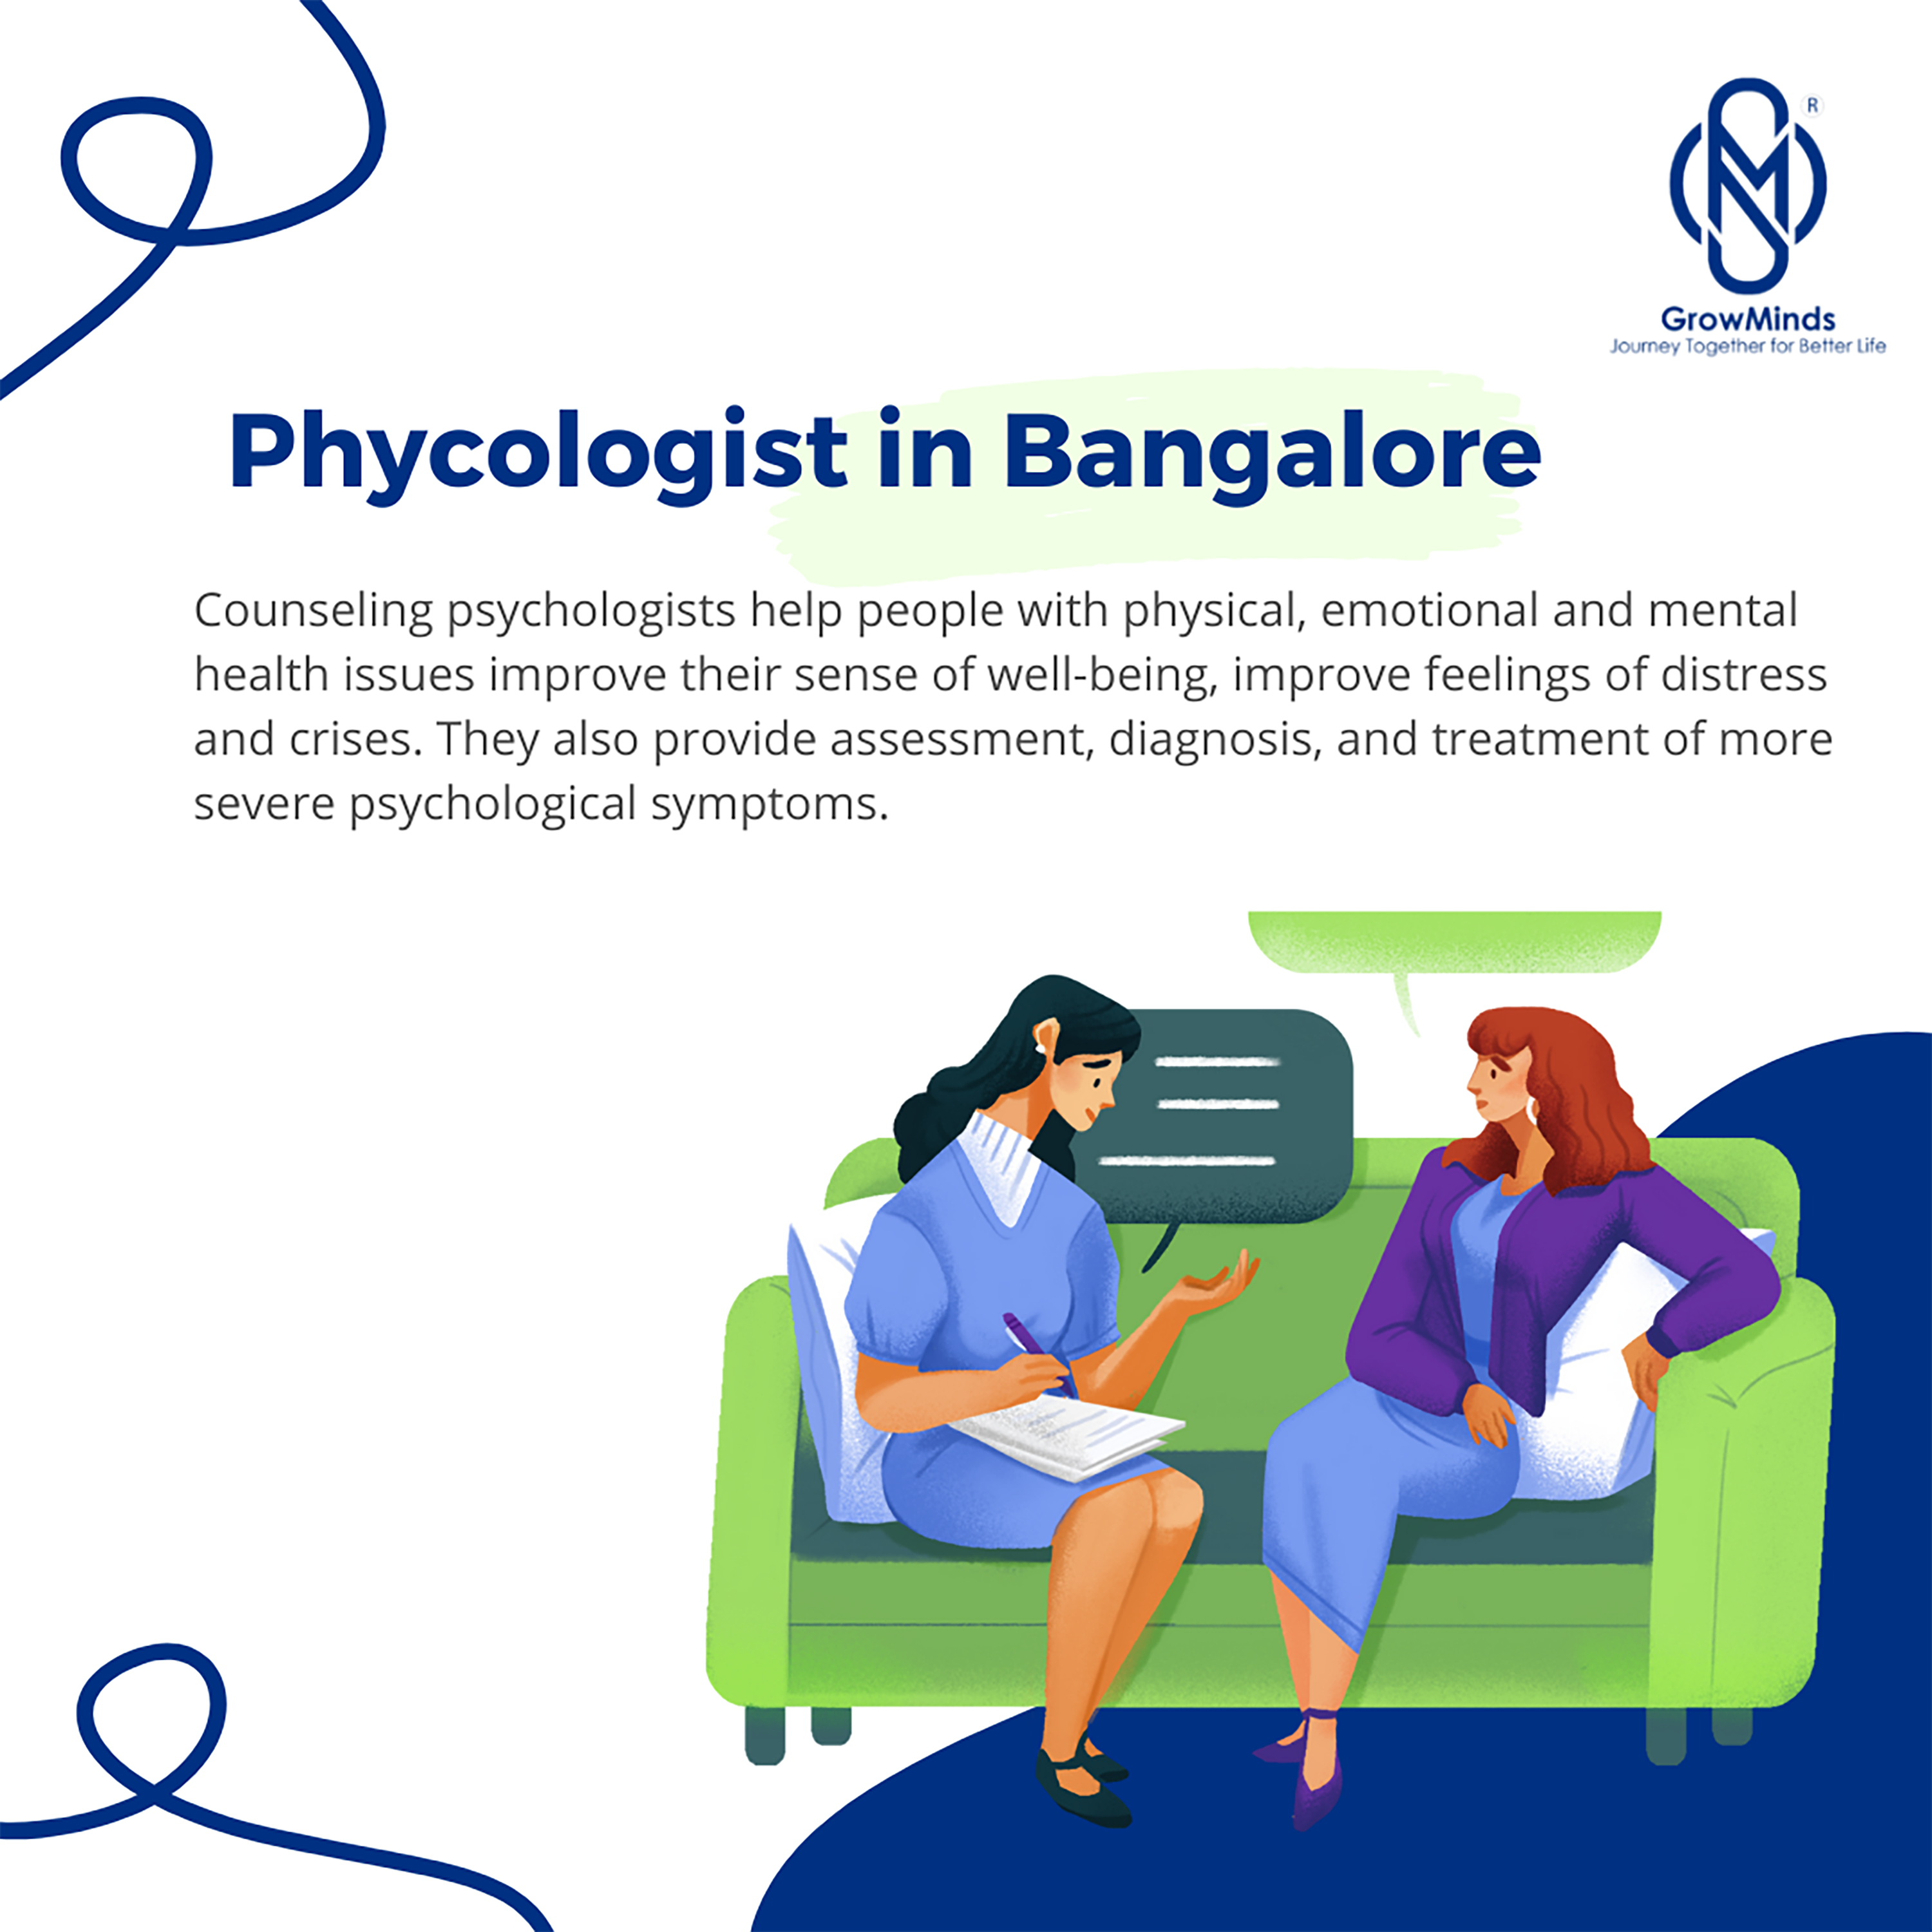 R

N)

GrowMinds
Journey Together for Better

Life

Phycologist in Bangalore

Counseling psychologists help people with physical, emotional and mental
health issues improve their sense of well-being, improve feelings of distress
and crises. They also provide assessment, diagnosis, and treatment of more
severe psychological symptoms.